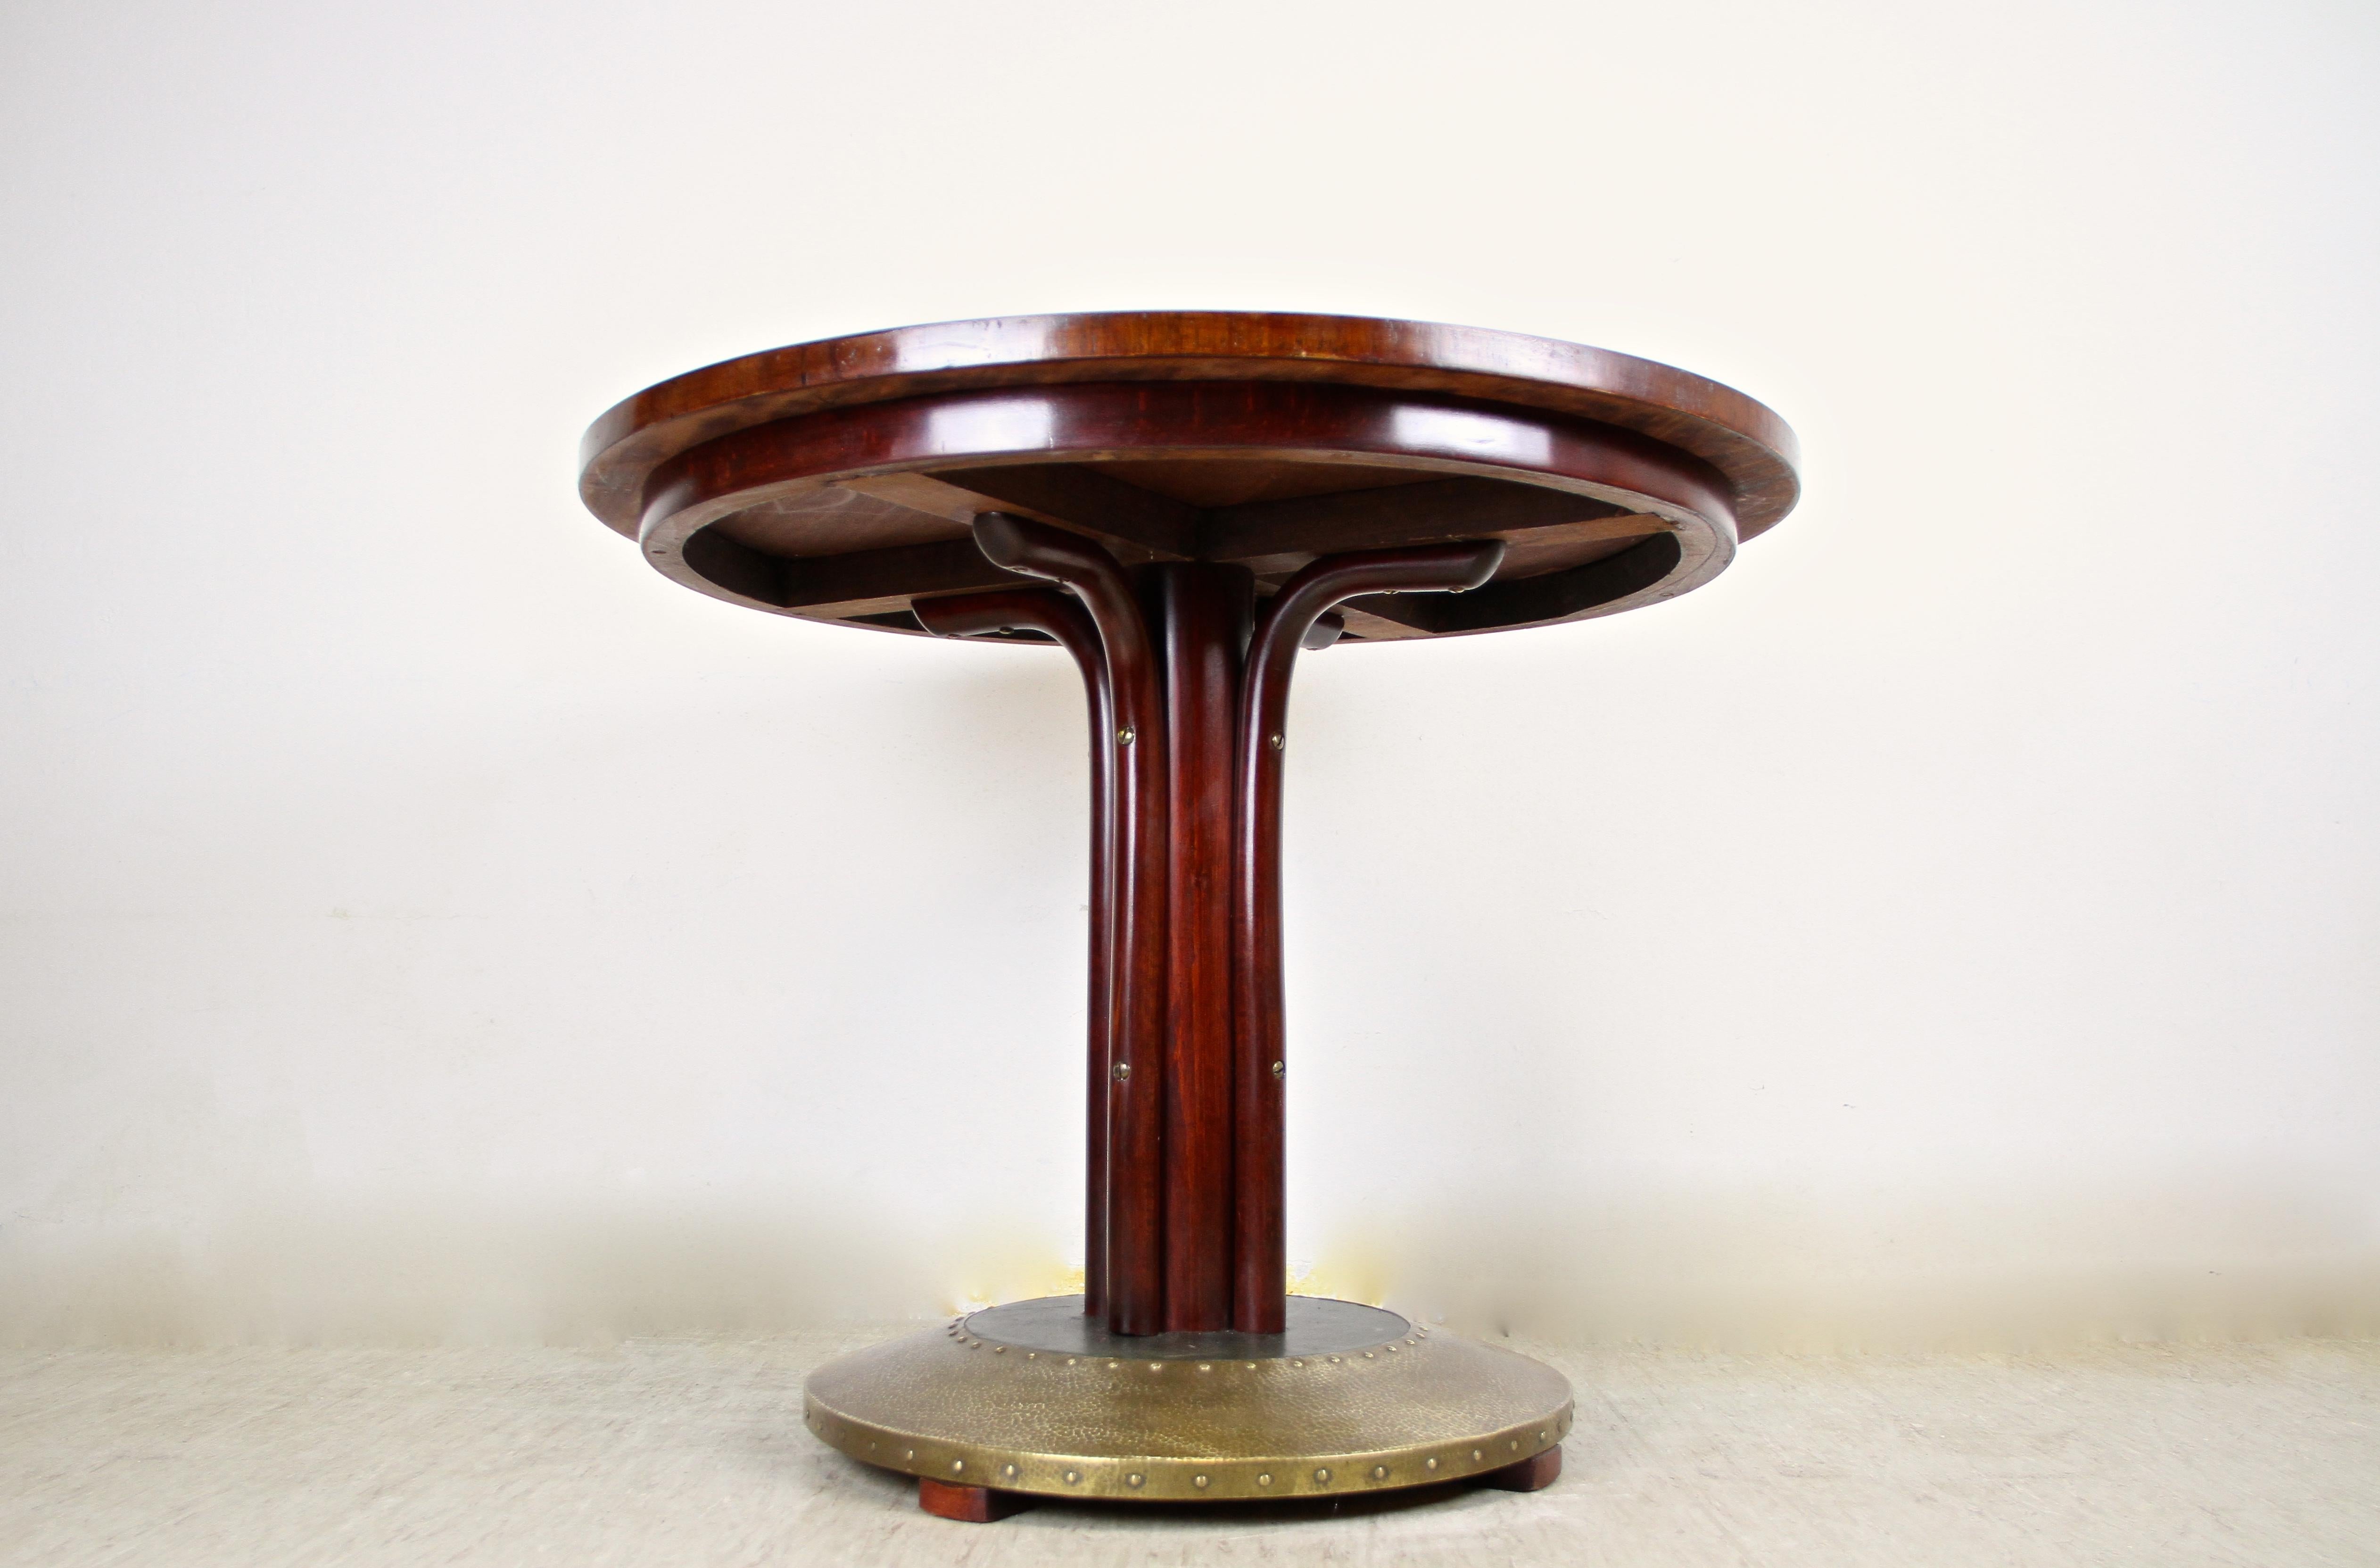 Art Nouveau Thonet Bentwood Coffee Table with Hammered Brass Base, Austria, circa 1915